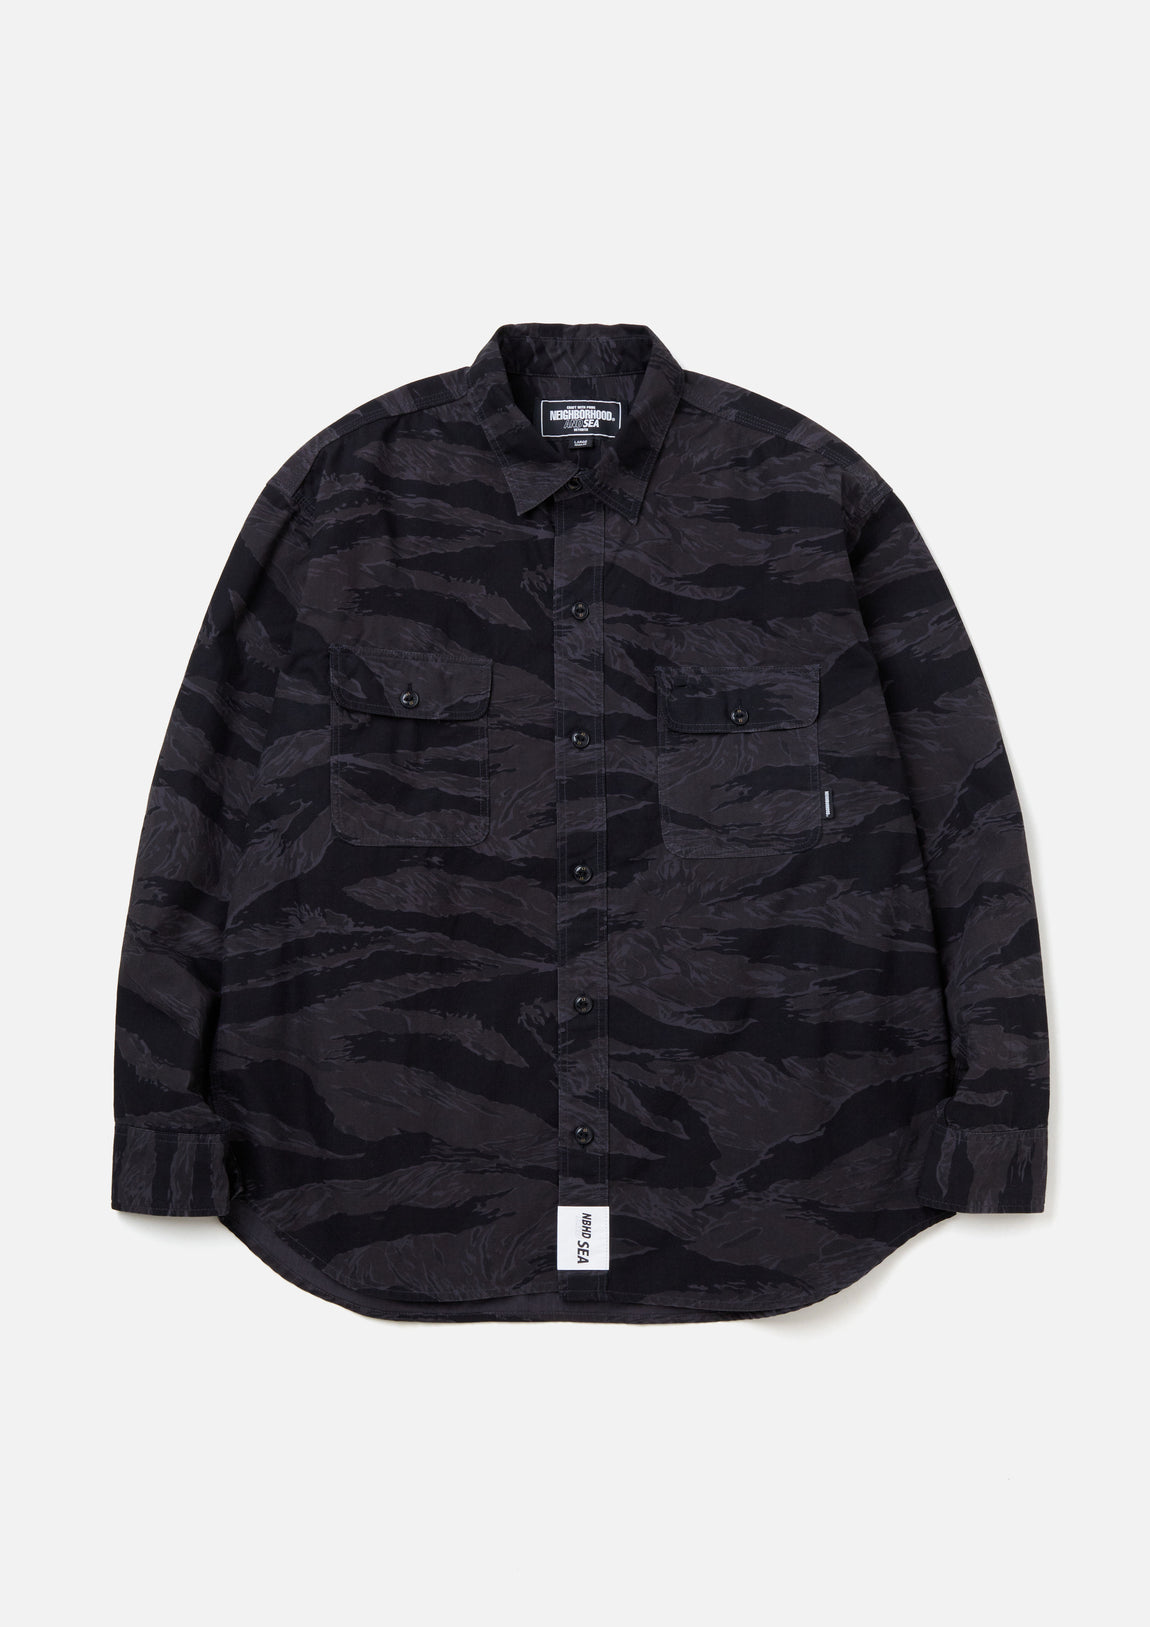 NH X WIND AND SEA . CAMOUFLAGE OFFICER SHIRT LS